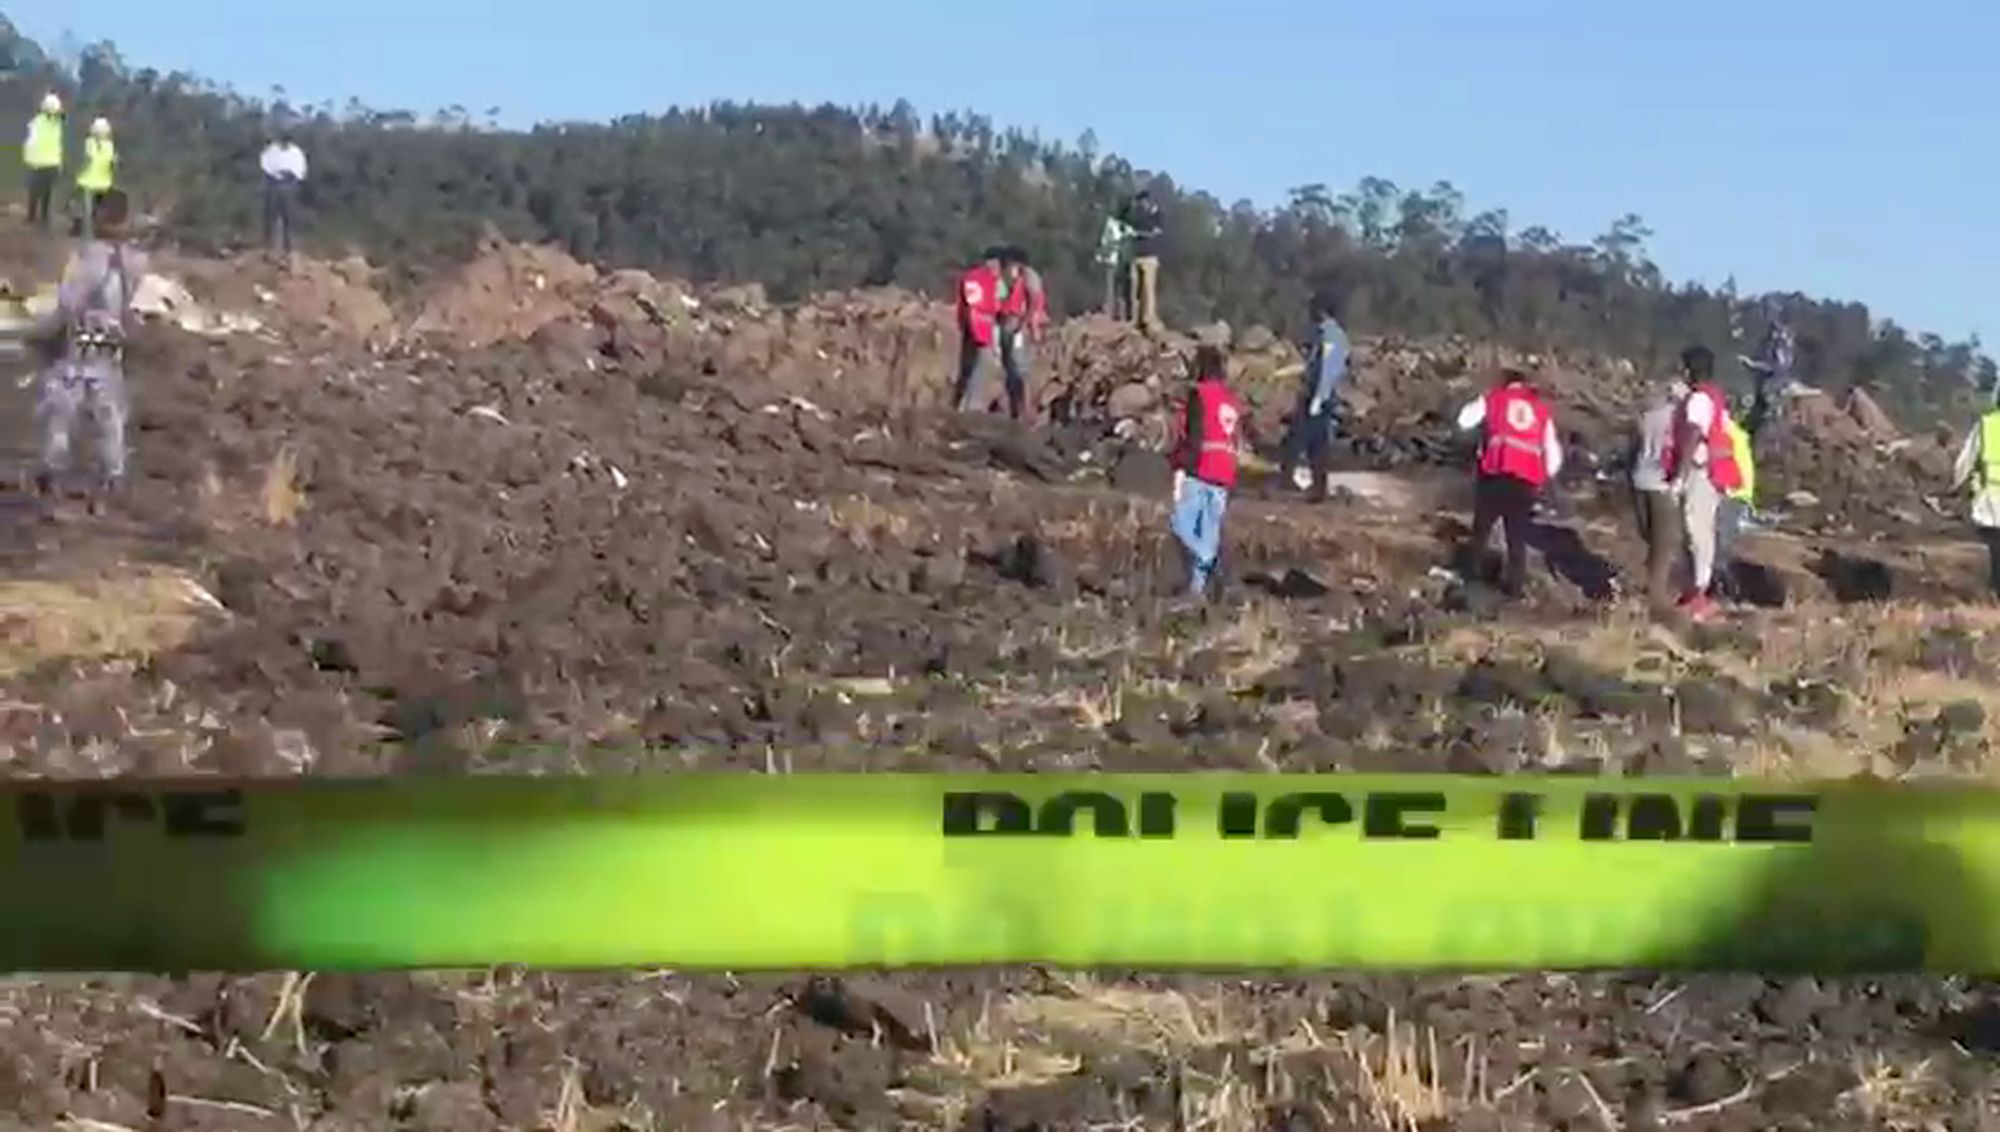 Government officials, doctors, aid workers among Ethiopian crash victims